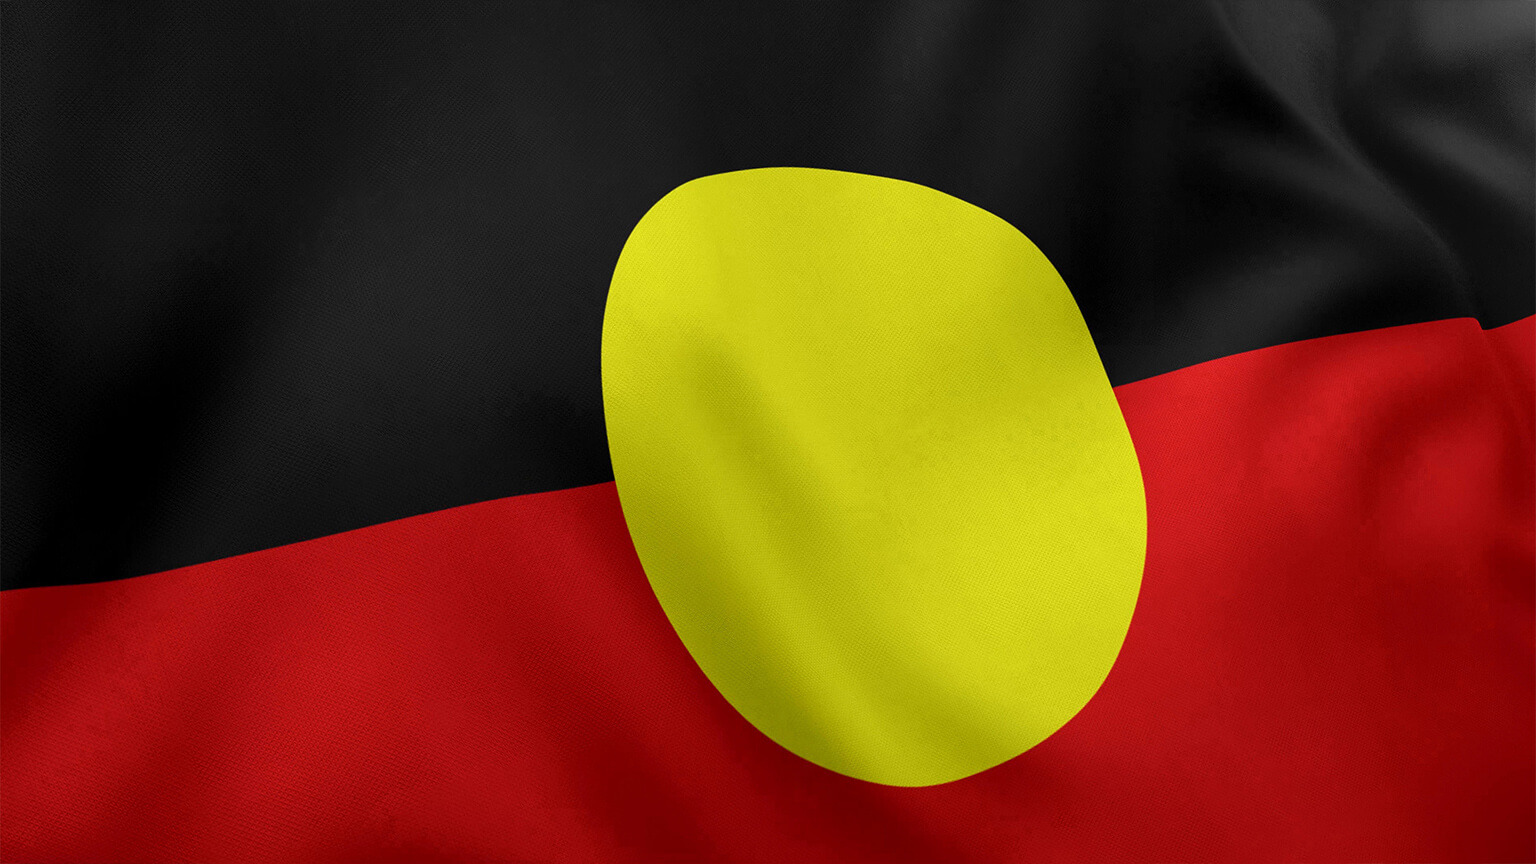 Aboriginal Flag. Equal halves of black (top) and red (bottom), with a yellow circle in the centre.